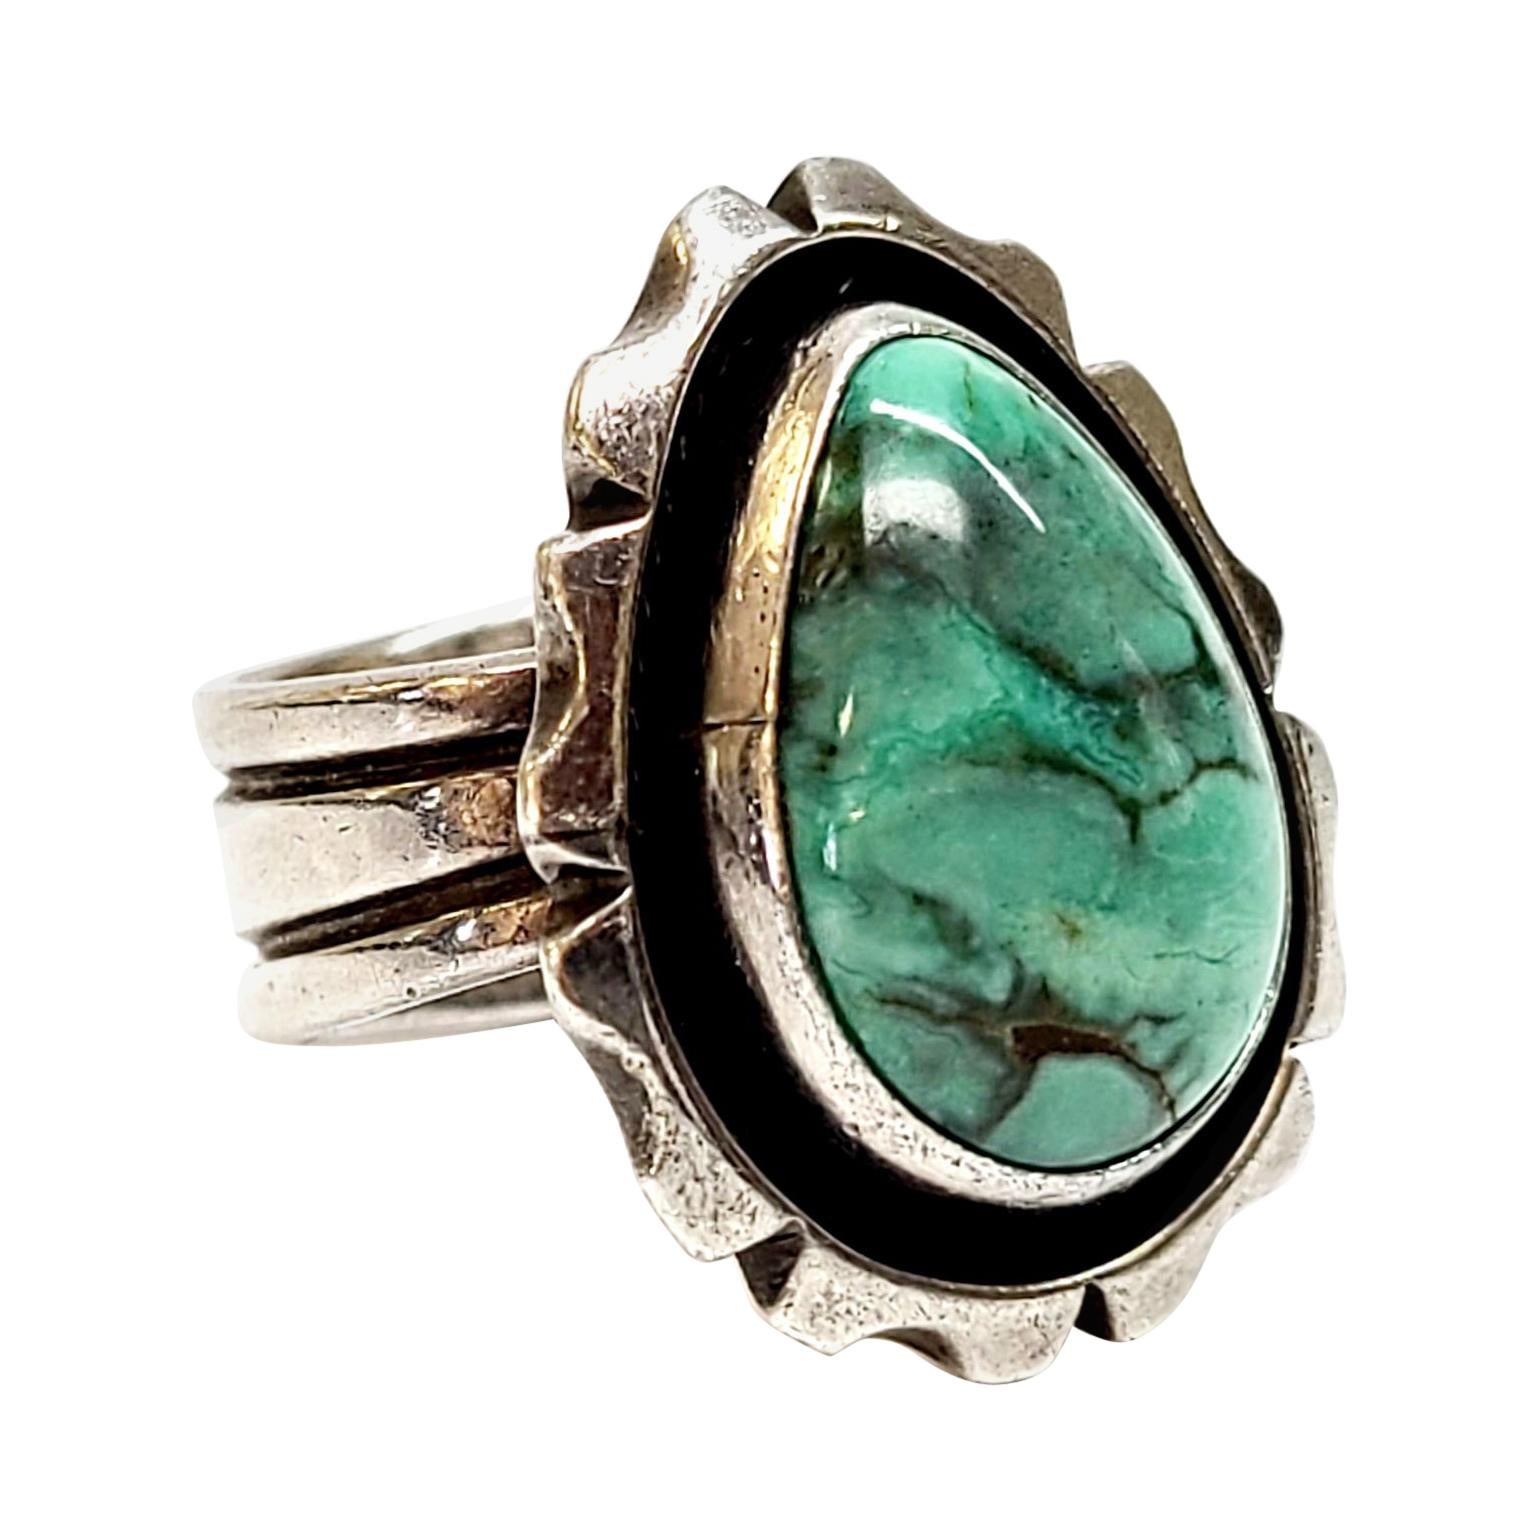 Signed Handmade Vintage Native American Sterling Silver & Turquoise Inlay Turquoise Ring